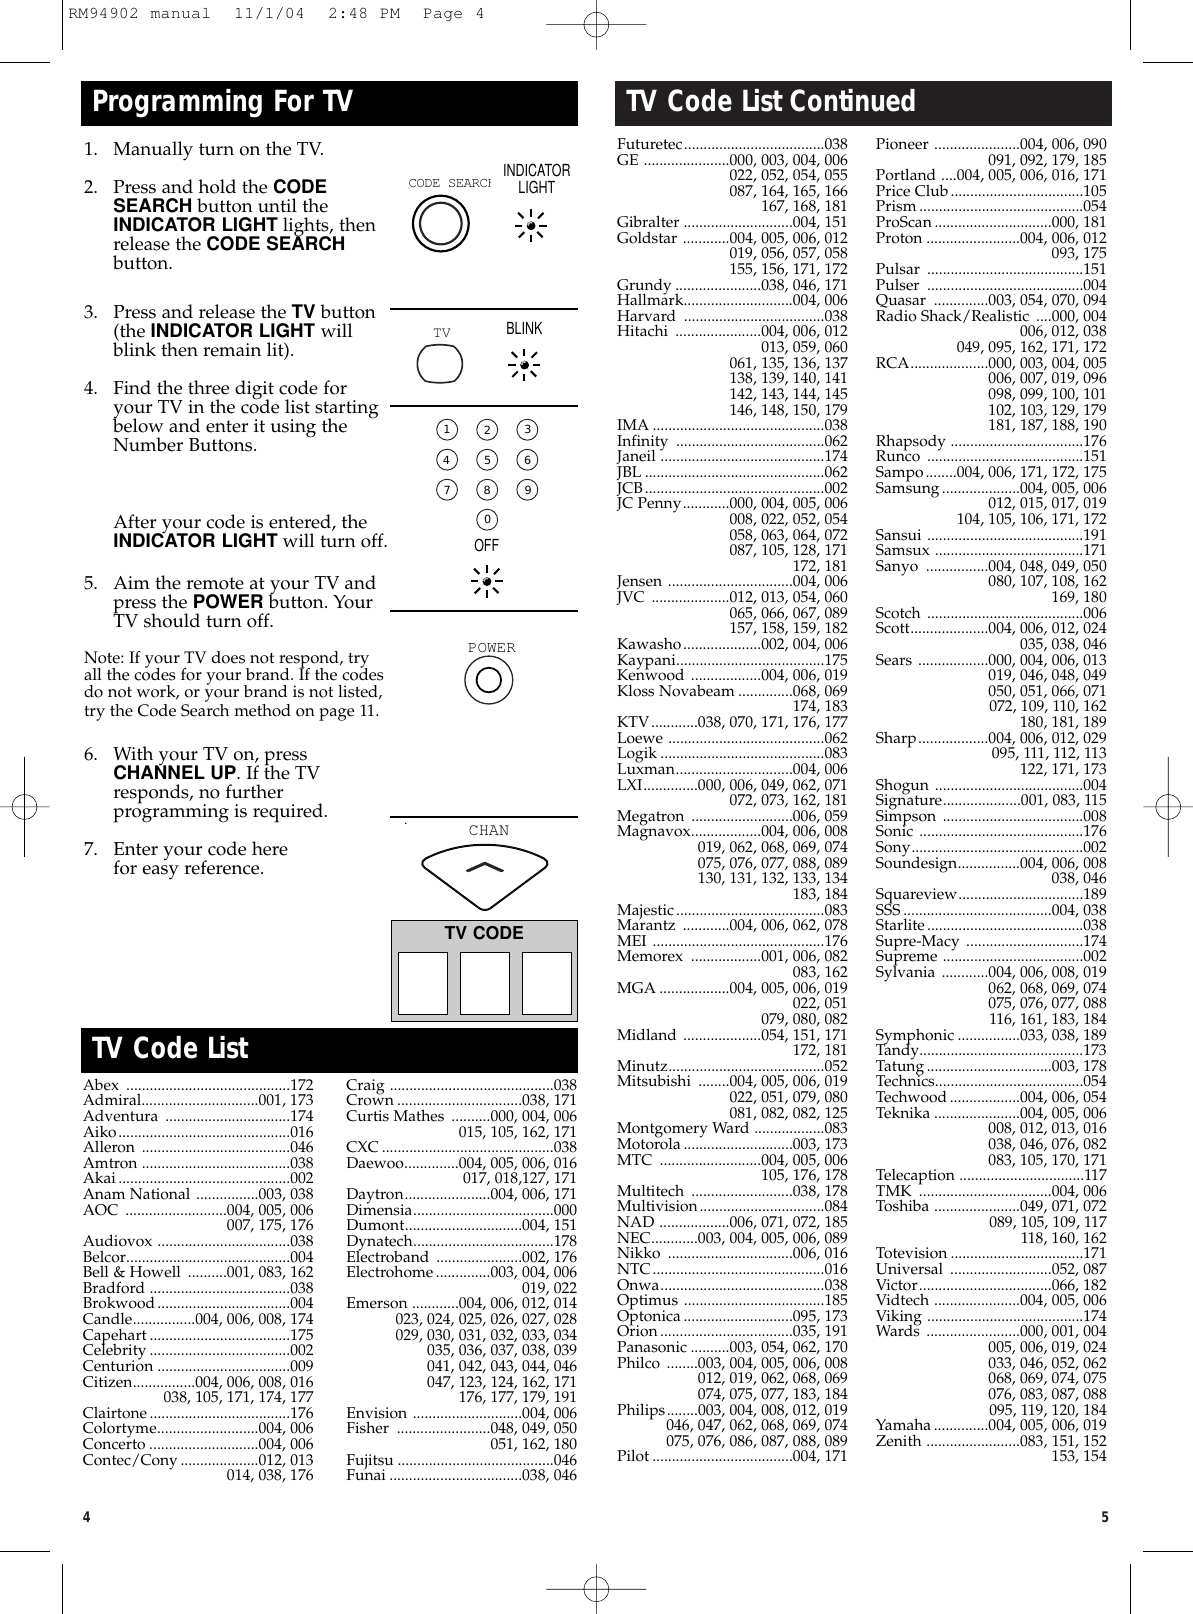 Page 2 of 8 - Ge-Appliances Ge-94902-Ge-Universal-Remote-Owners-Manual RM94902 Manual